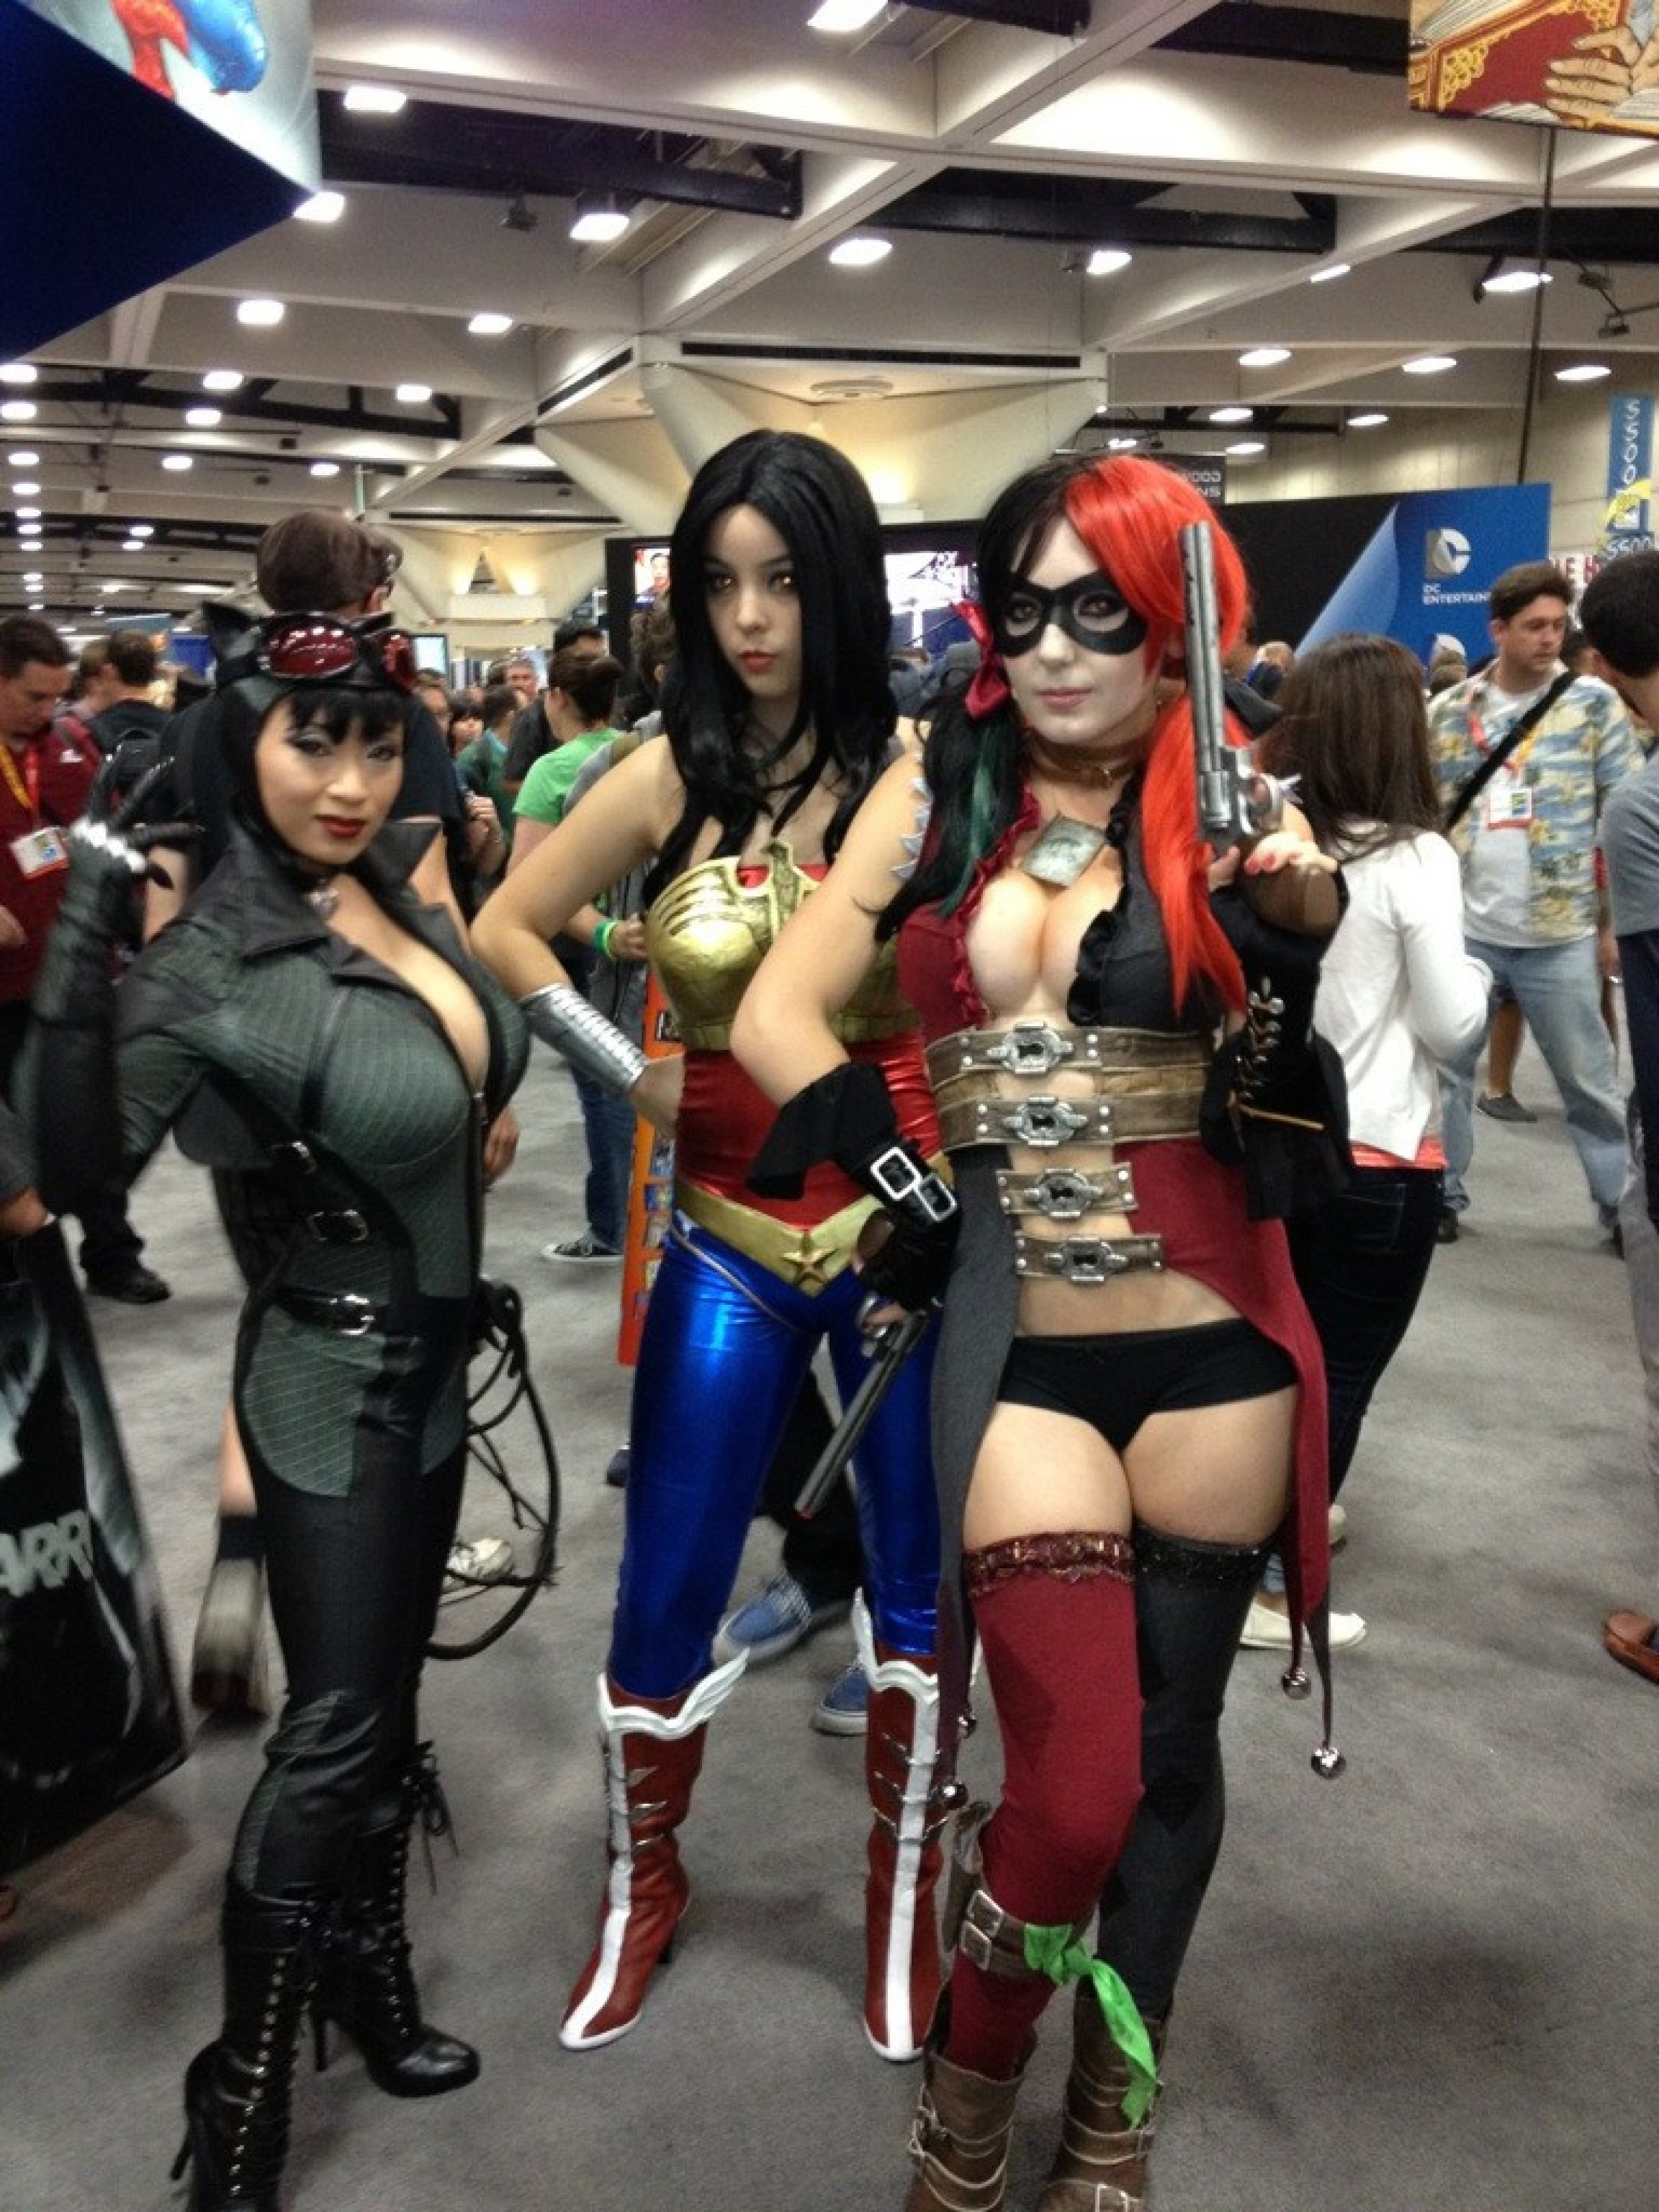 Catwoman, Wonder Woman, and Harley Quinn